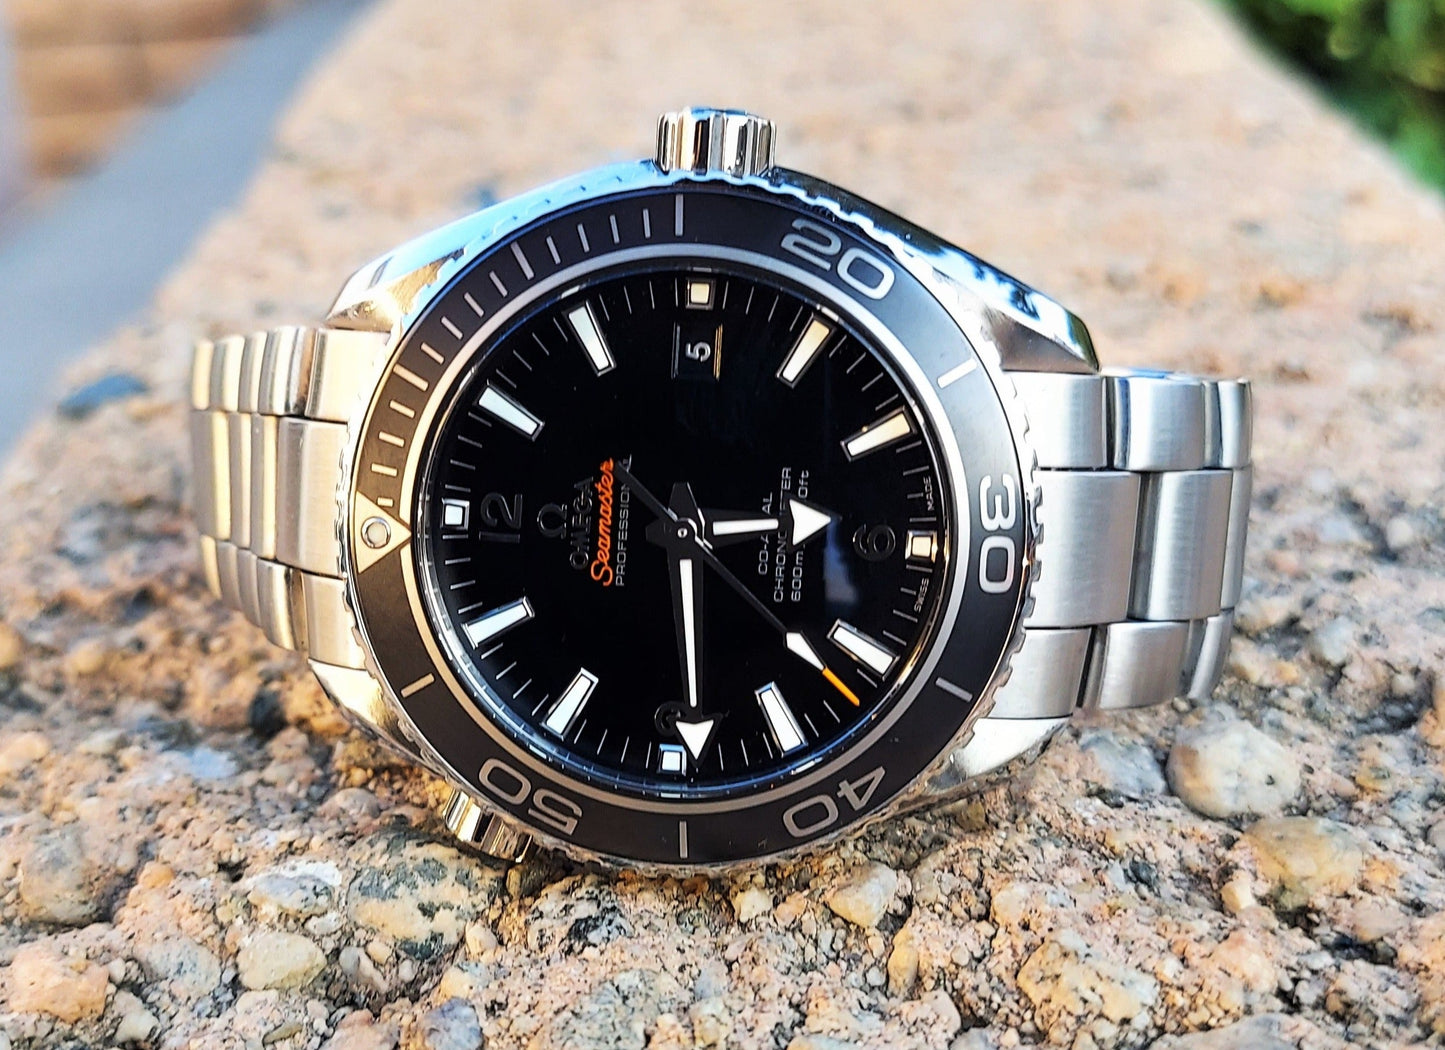 Omega Seamaster Professional Planet Ocean, Co-Axial Automatic